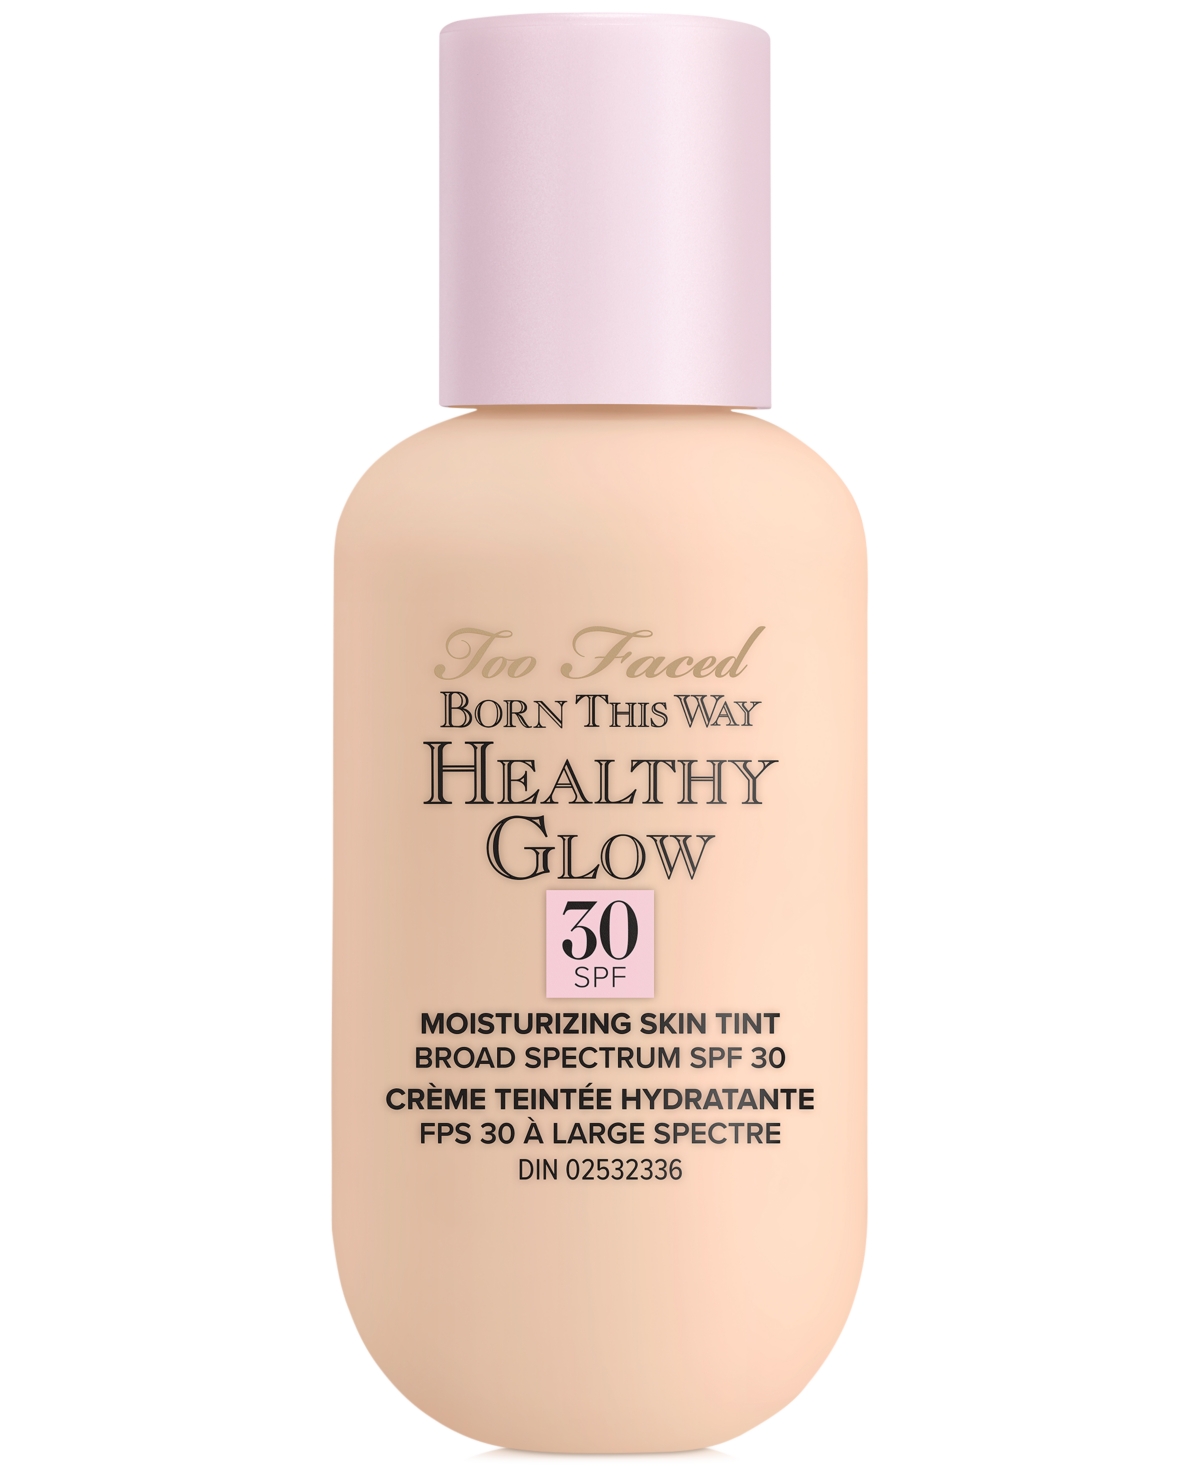 Too Faced Born This Way Healthy Glow Moisturizing Skin Tint Spf 30 In Almond